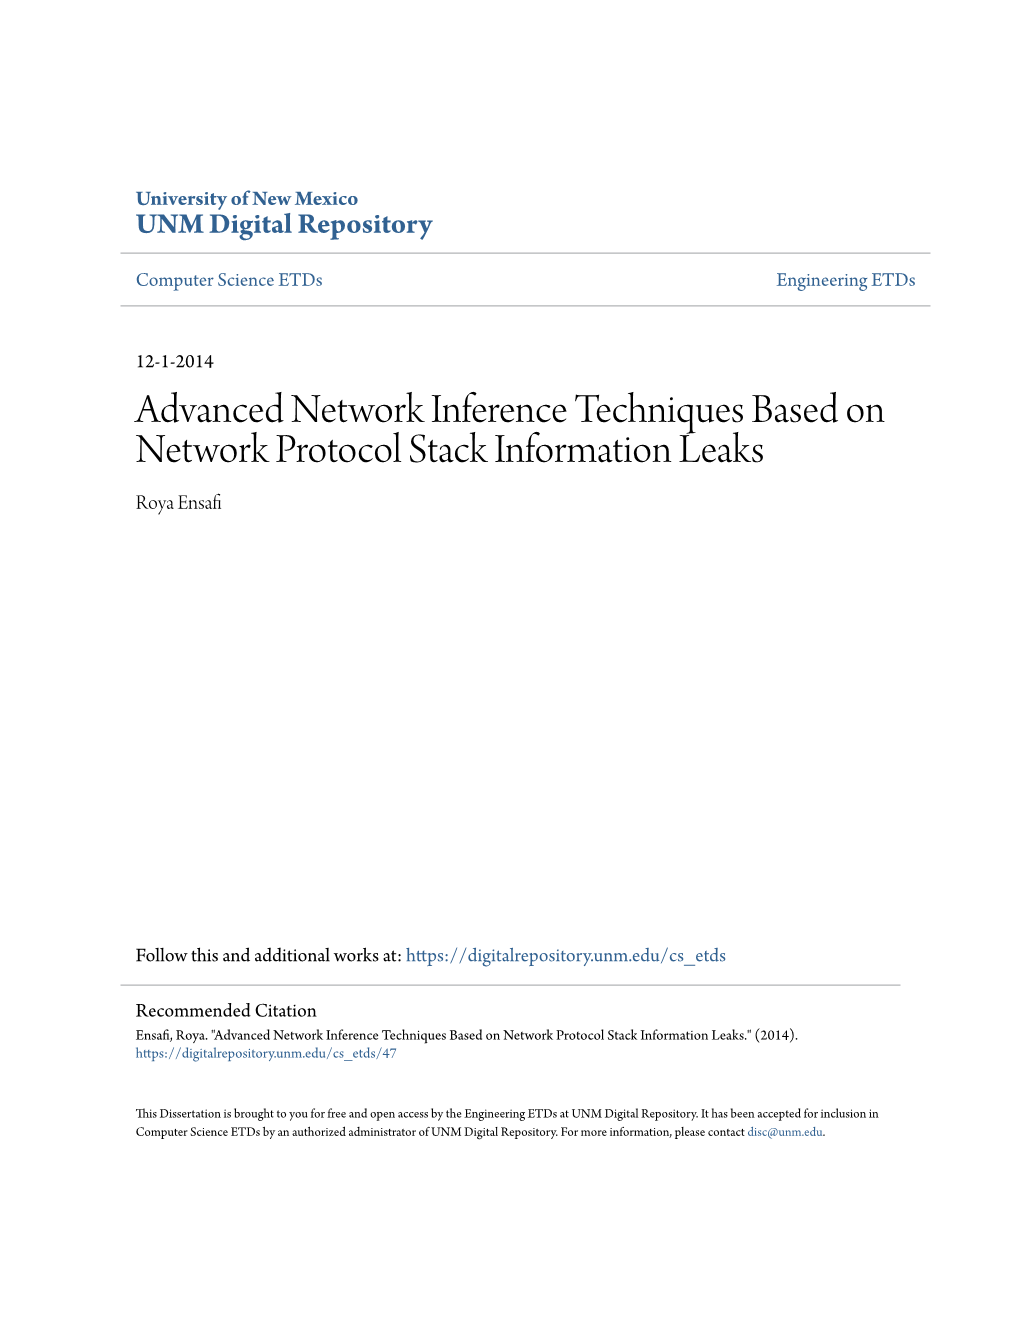 Advanced Network Inference Techniques Based on Network Protocol Stack Information Leaks Roya Ensafi